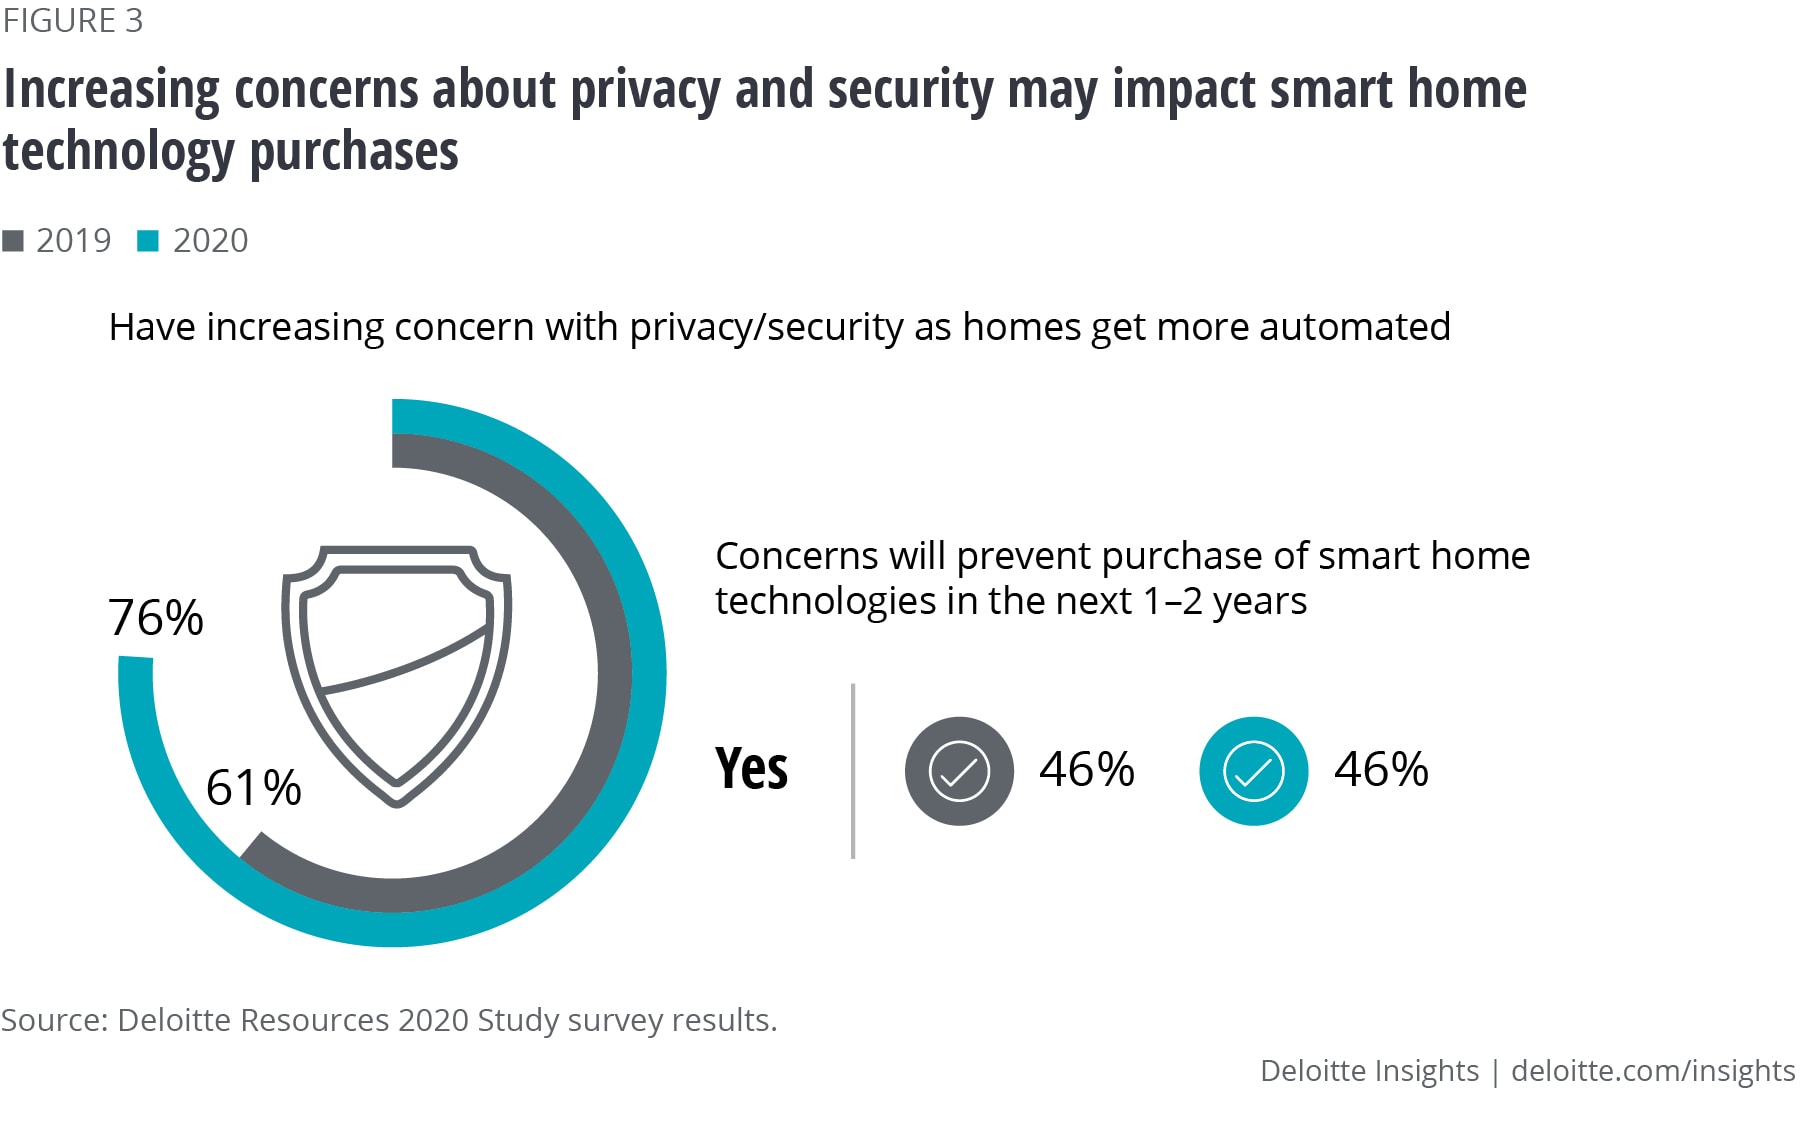 Increasing concerns about privacy and security may impact smart home technology purchases